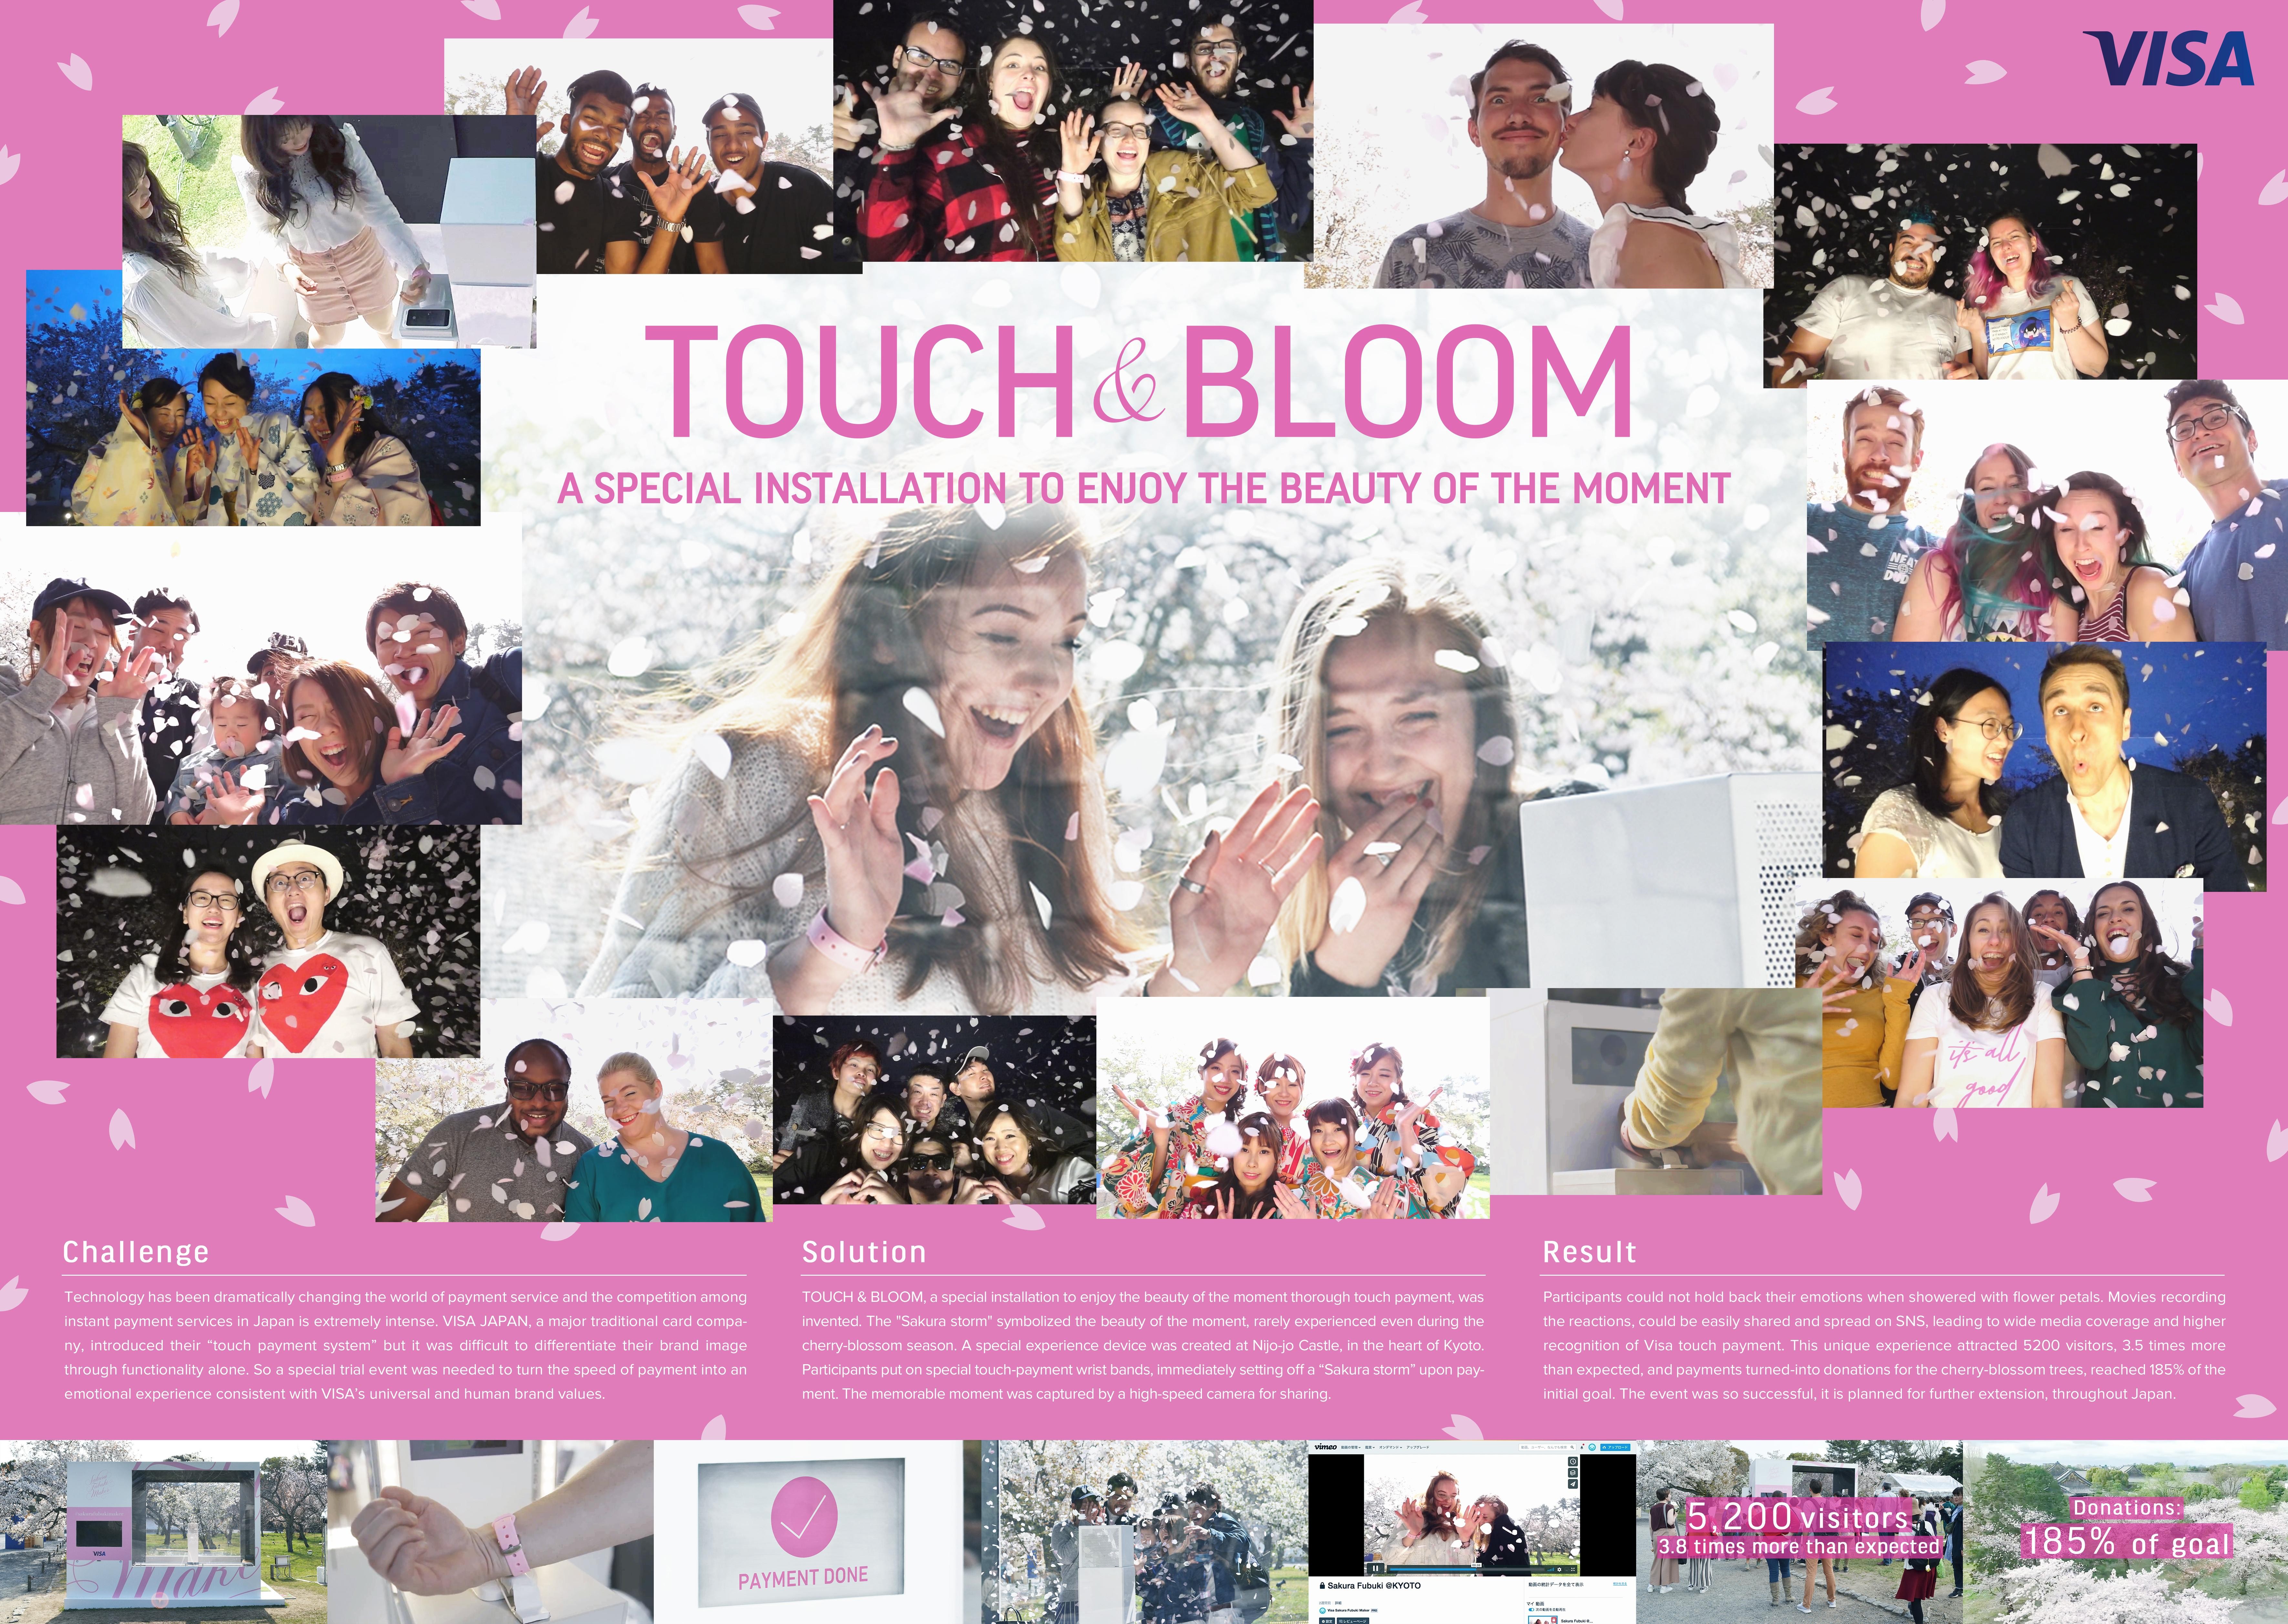 TOUCH & BLOOM